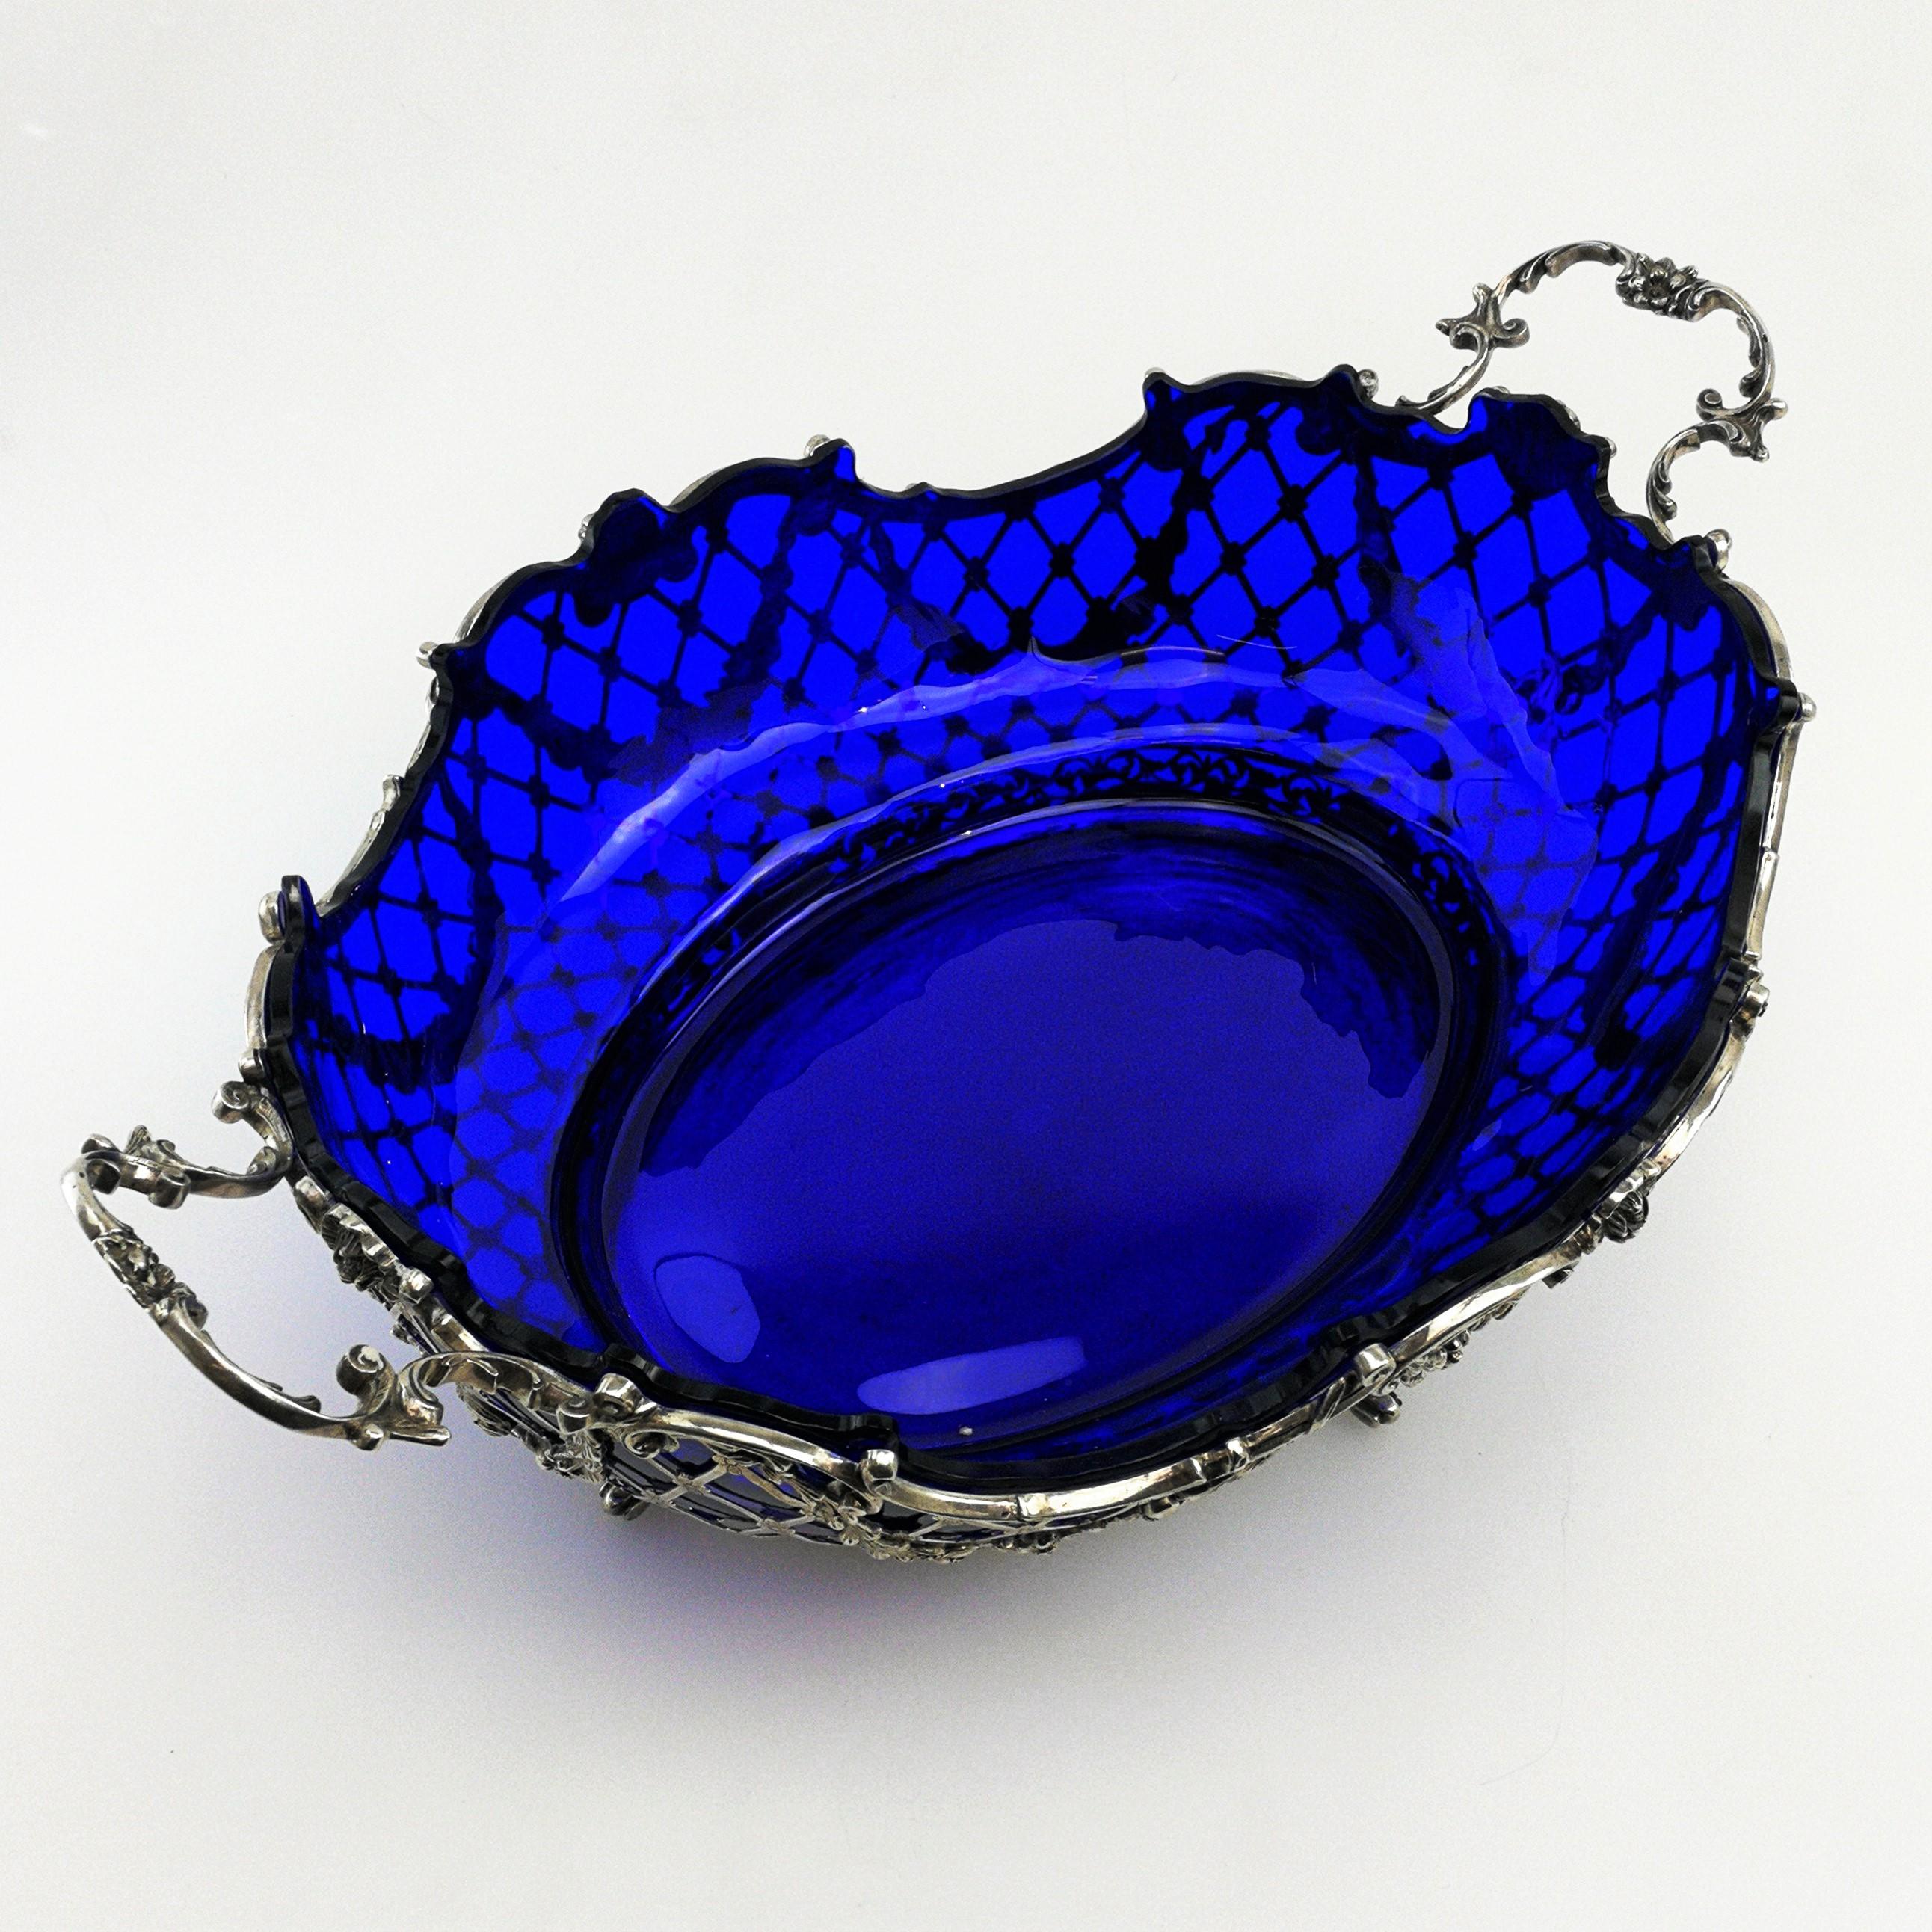 Sterling Silver Large Antique German Solid Silver and Glass Basket / Bowl, circa 1890